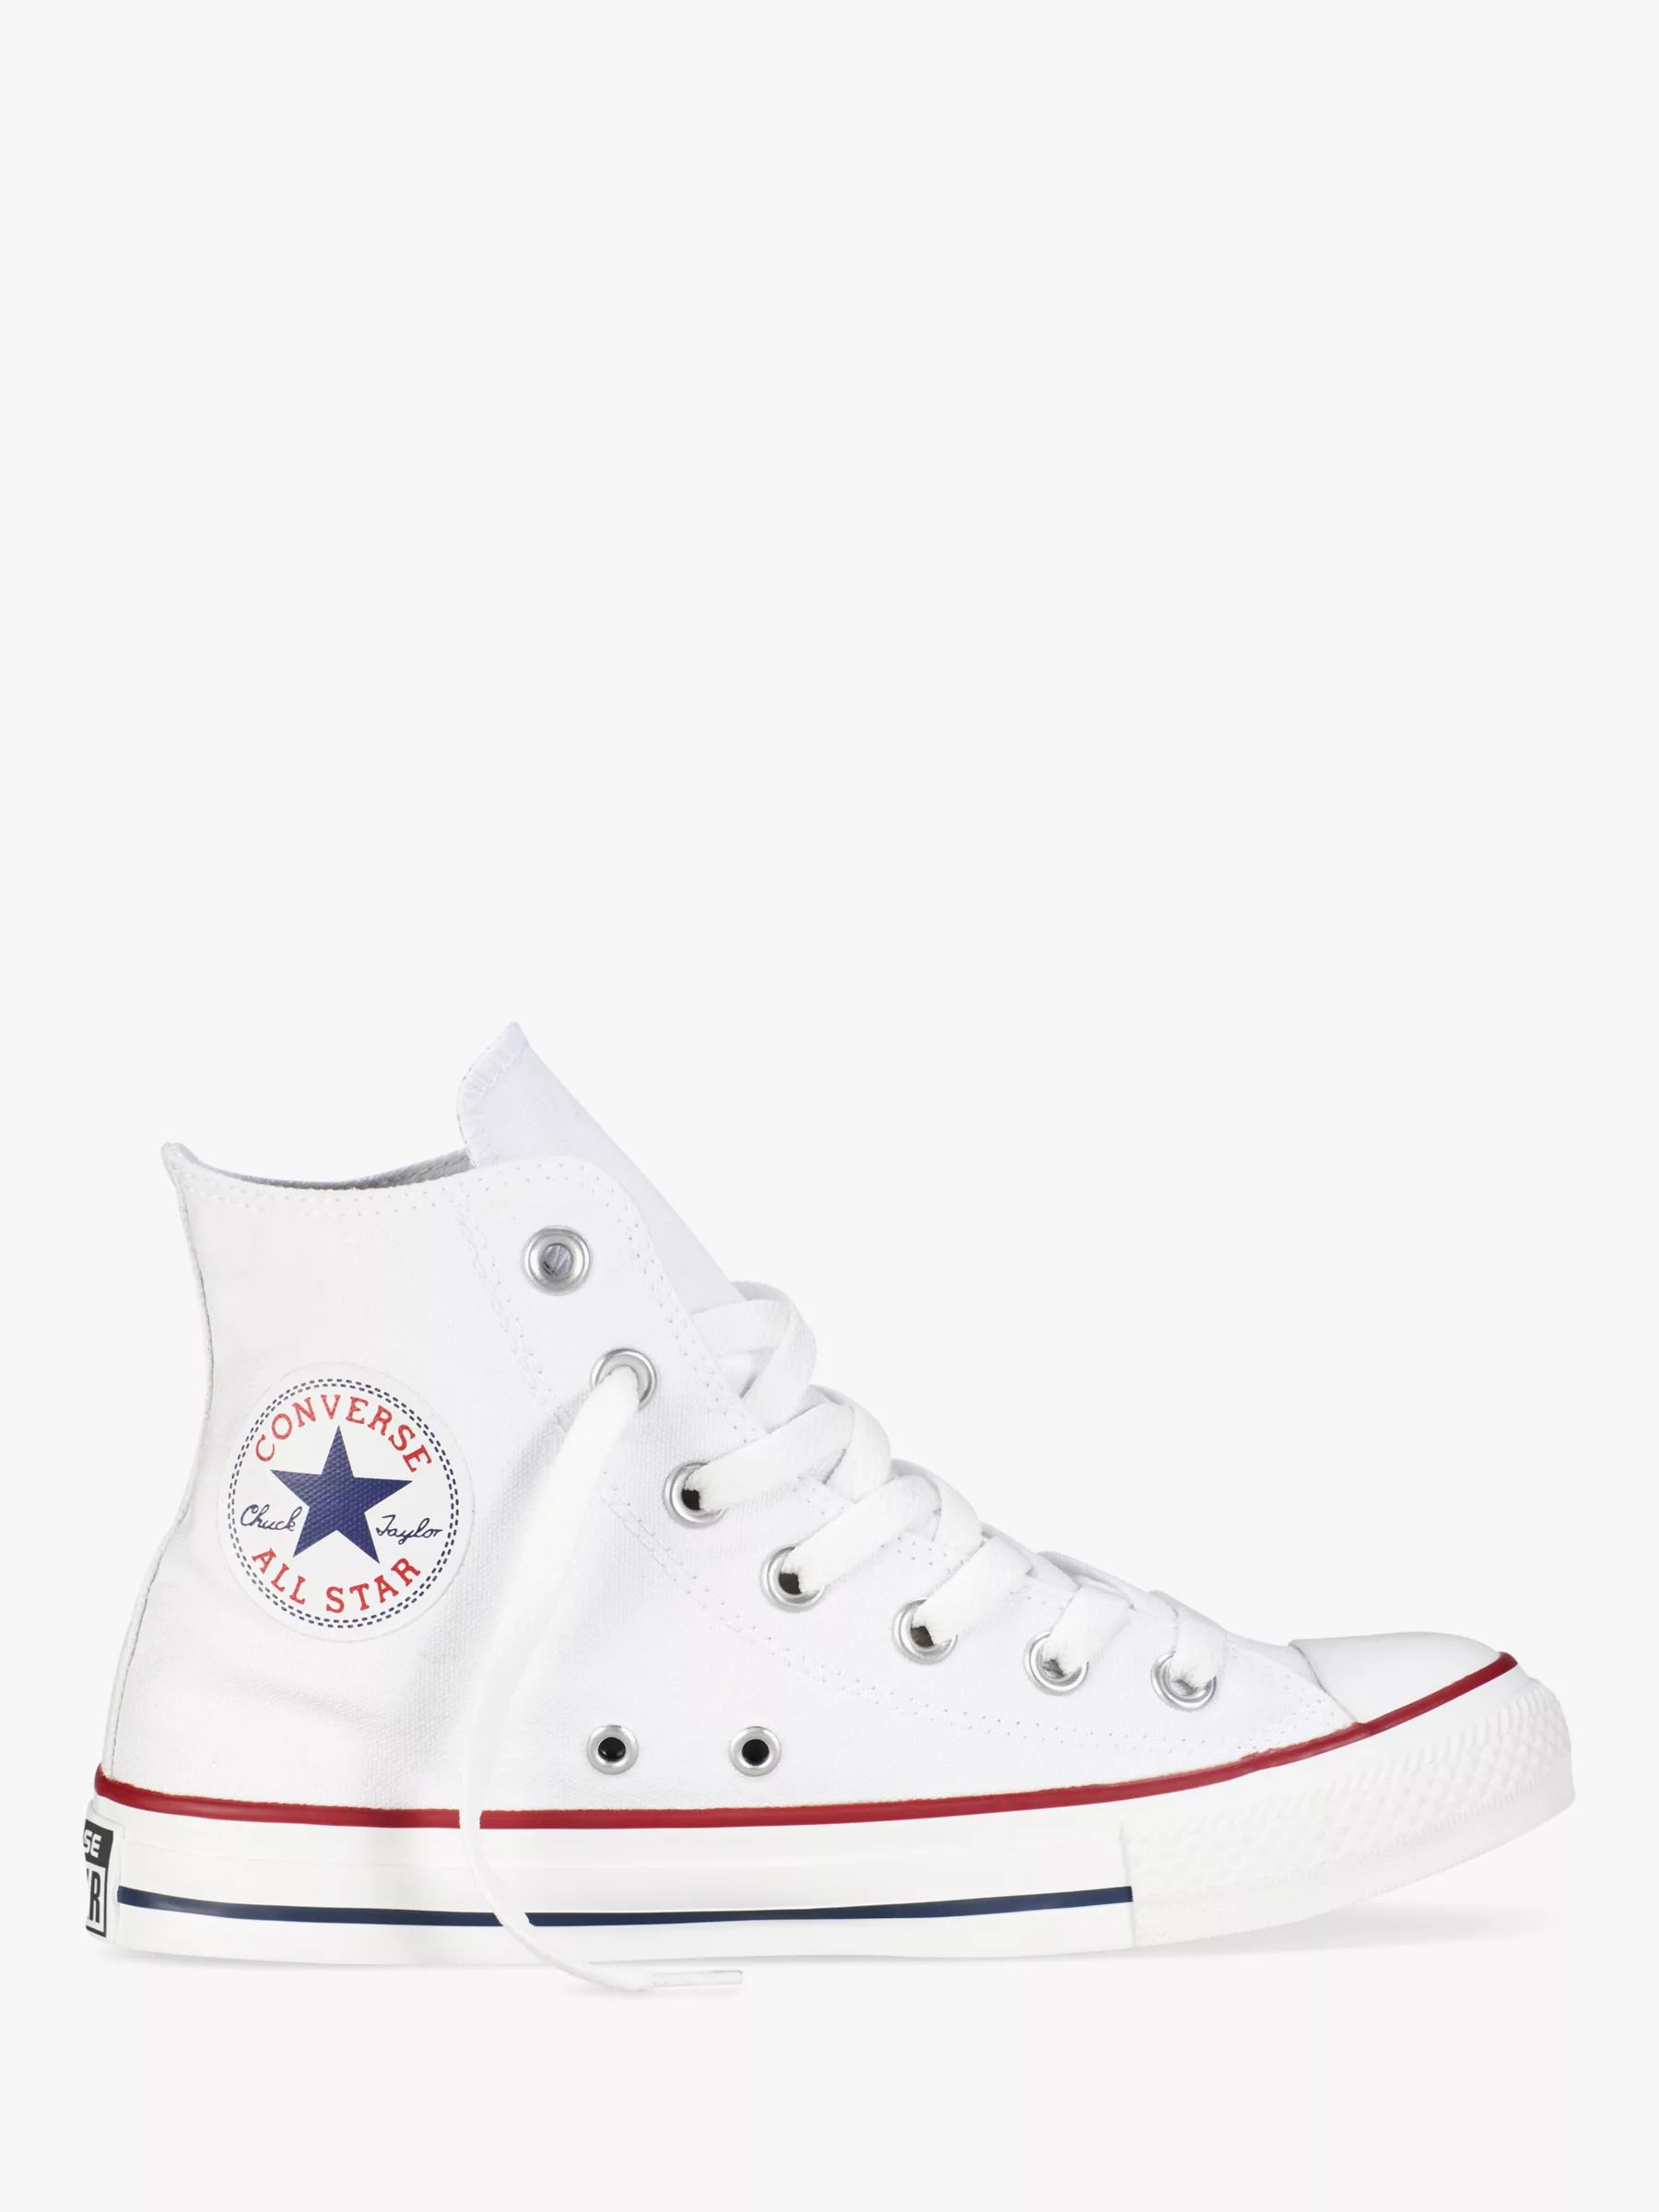 Converse Chuck Taylor All Star Canvas Hi-Top Trainers, White | John Lewis (UK)